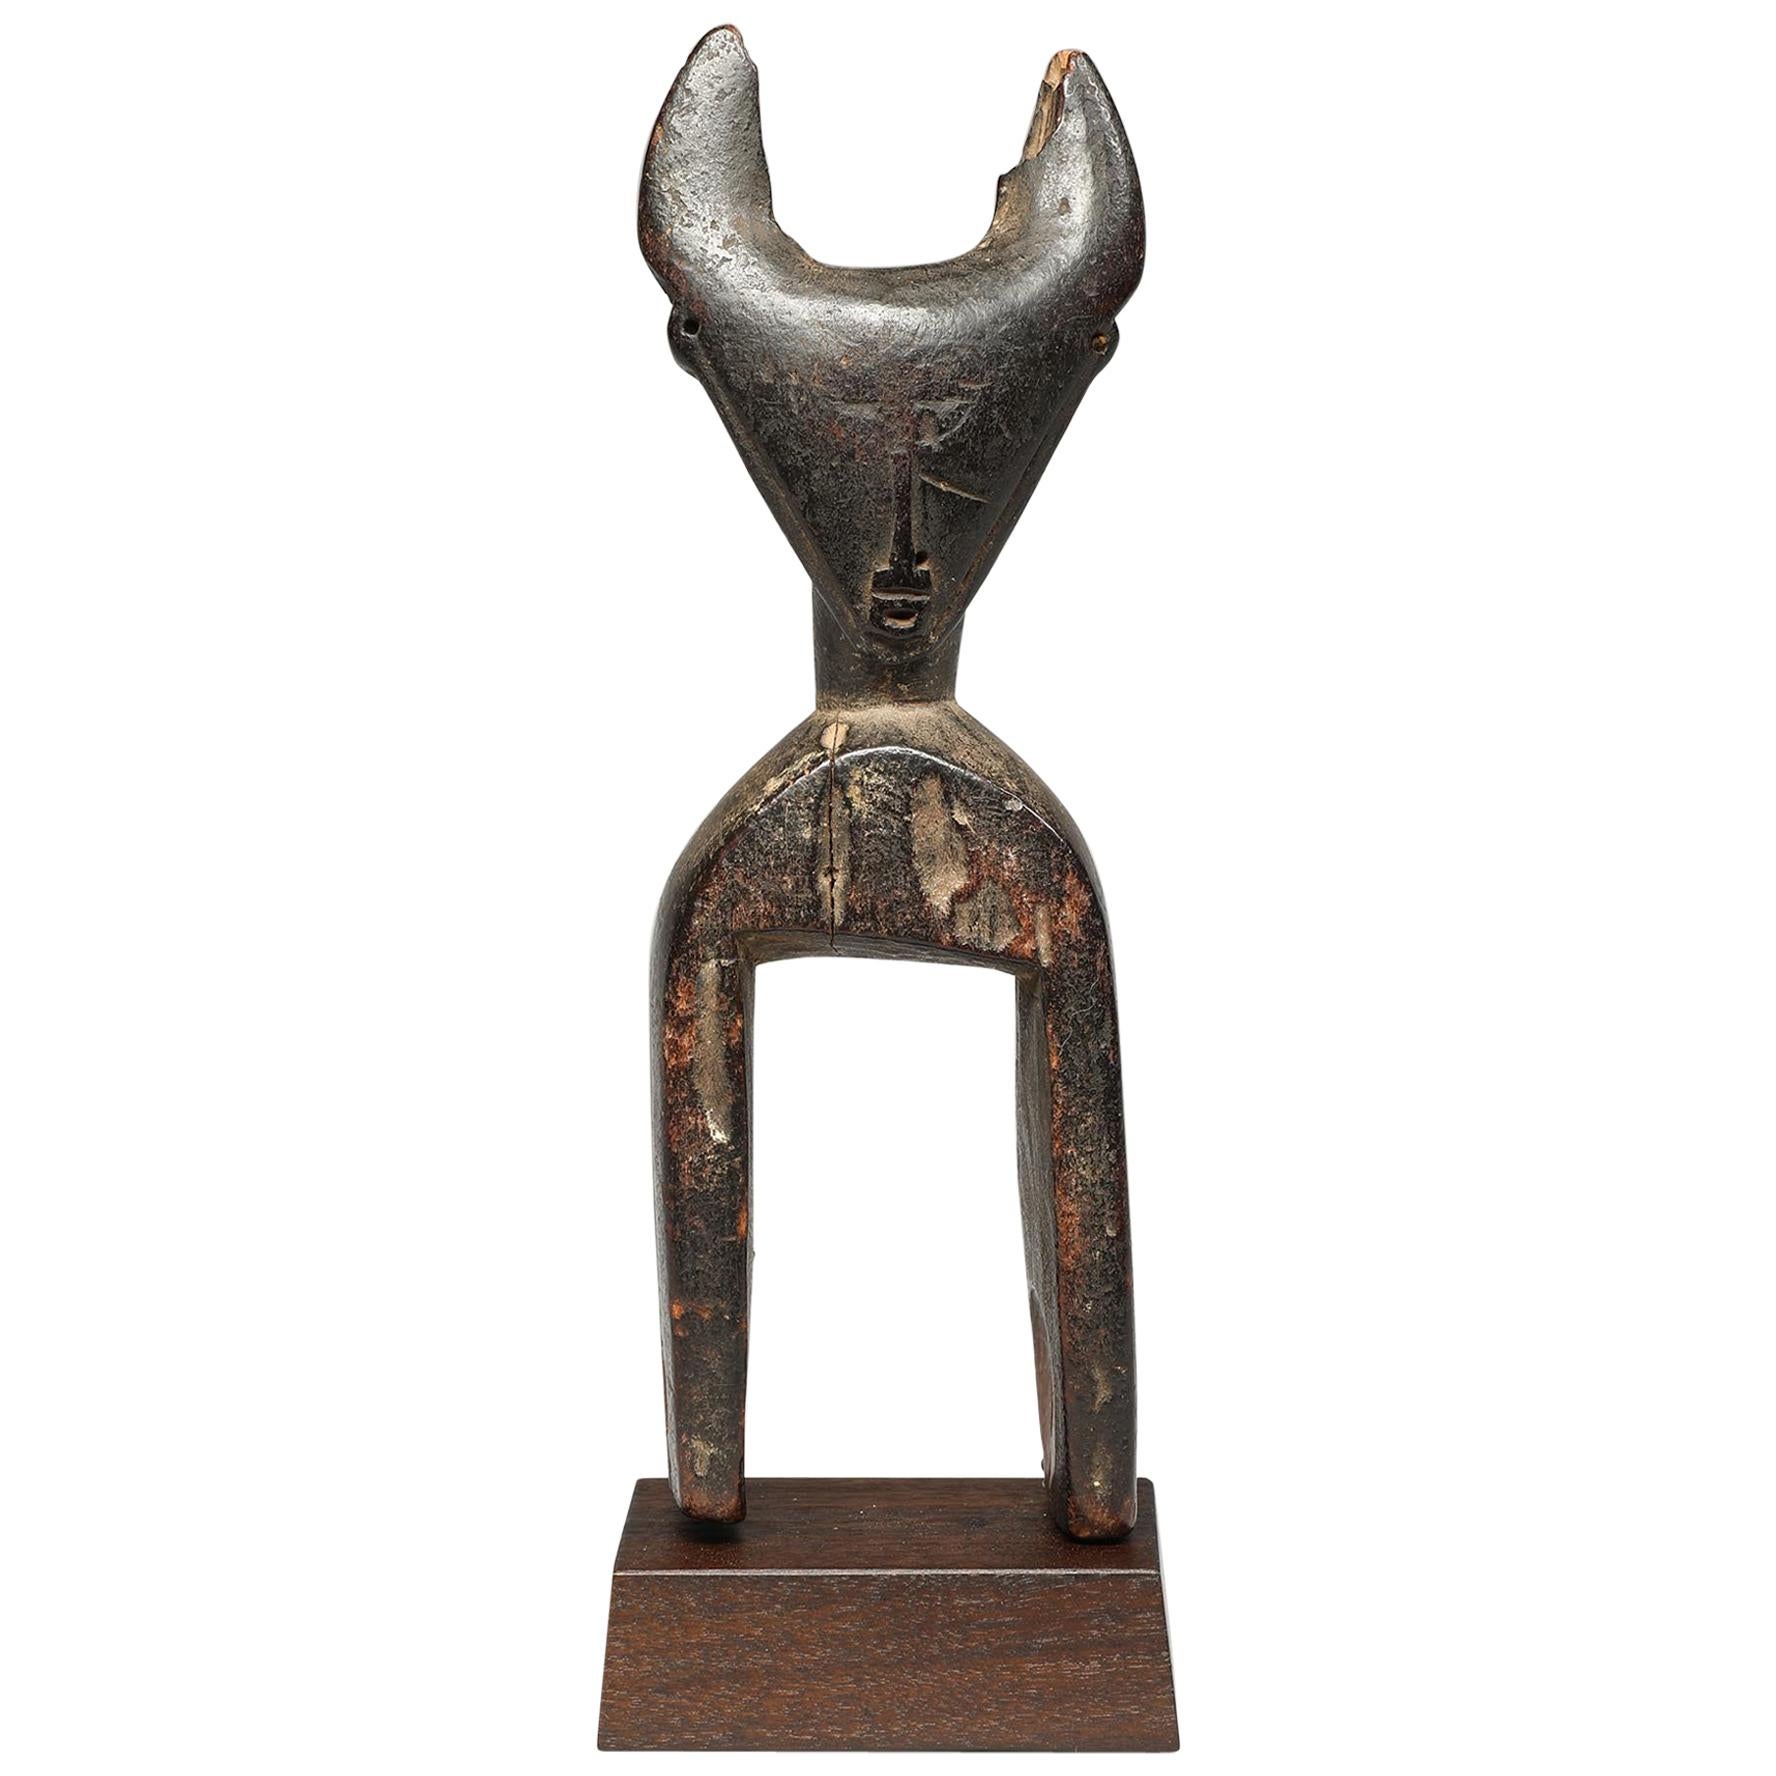 Djimini Cote d'Ivoire Wood Pulley Ex Christies 1996 Sublime Antelope Face Africa For Sale